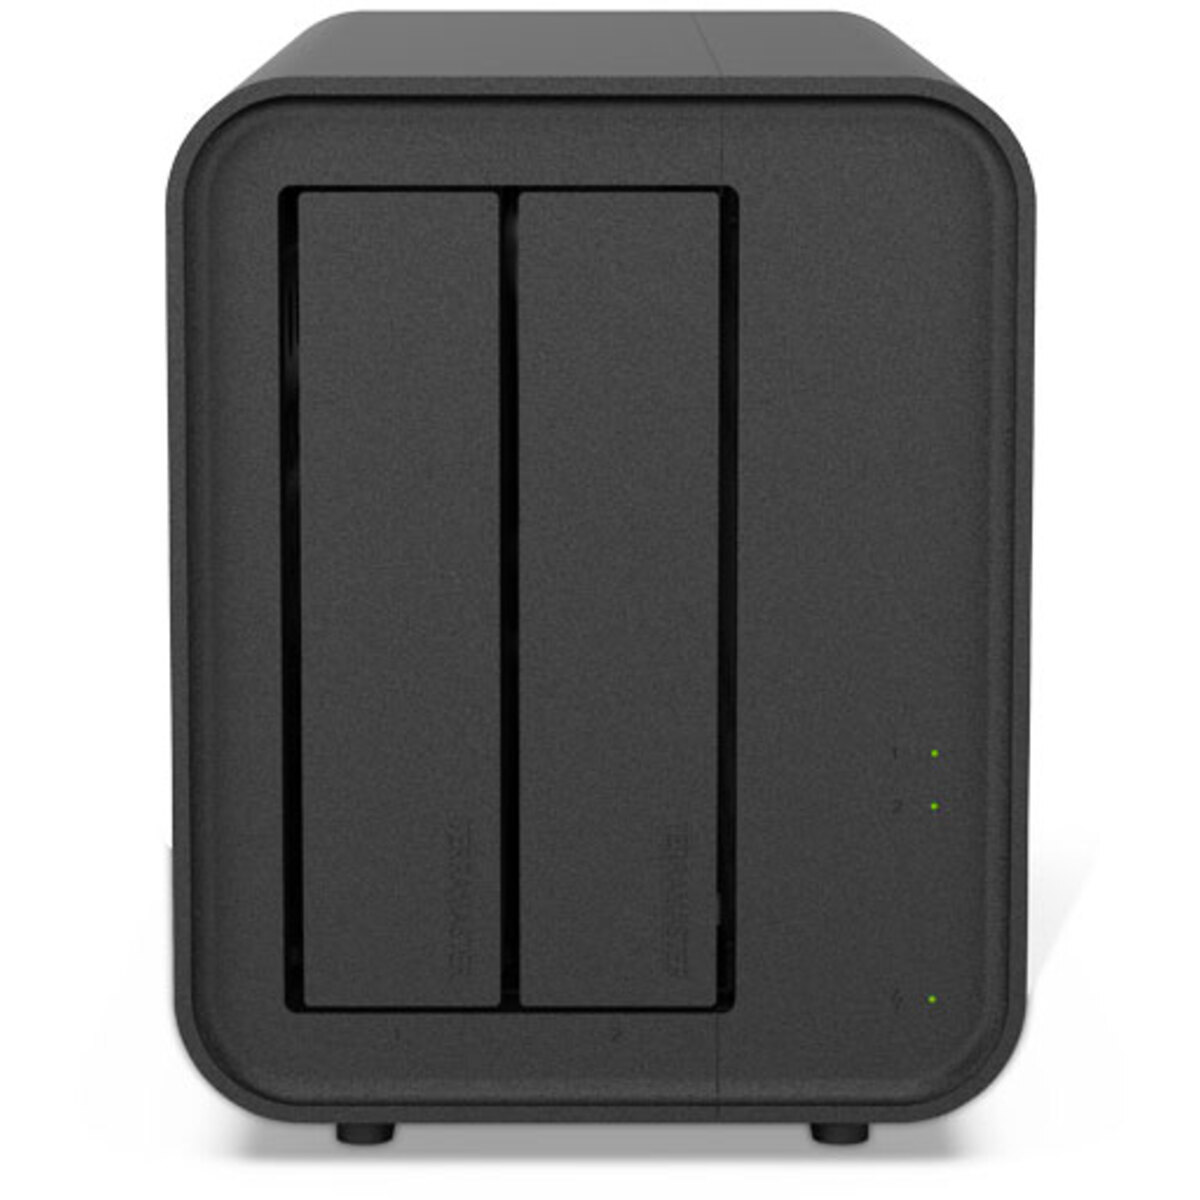 TerraMaster D5 Hybrid 24tb 2-Bay Desktop Multimedia / Power User / Business DAS - Direct Attached Storage Device 2x12tb Seagate EXOS X18 ST12000NM000J 3.5 7200rpm SATA 6Gb/s HDD ENTERPRISE Class Drives Installed - Burn-In Tested D5 Hybrid